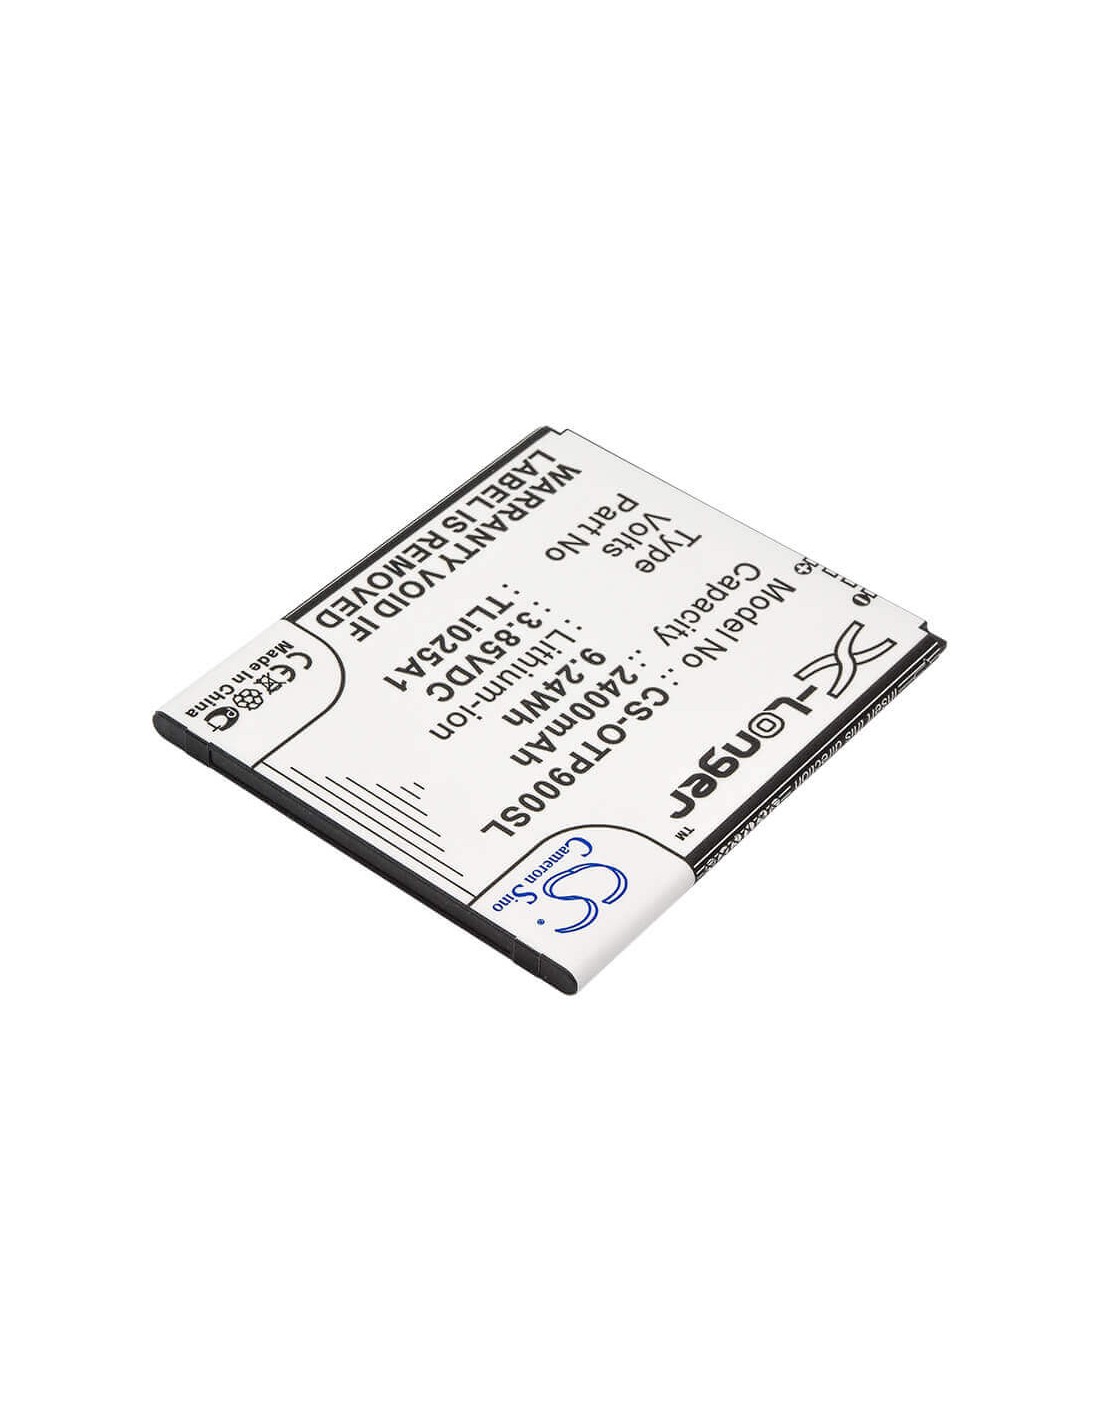 Battery for Alcatel, One Touch Pixi 4 6", One Touch Pixi 4 6.0 3.85V, 2400mAh - 9.24Wh